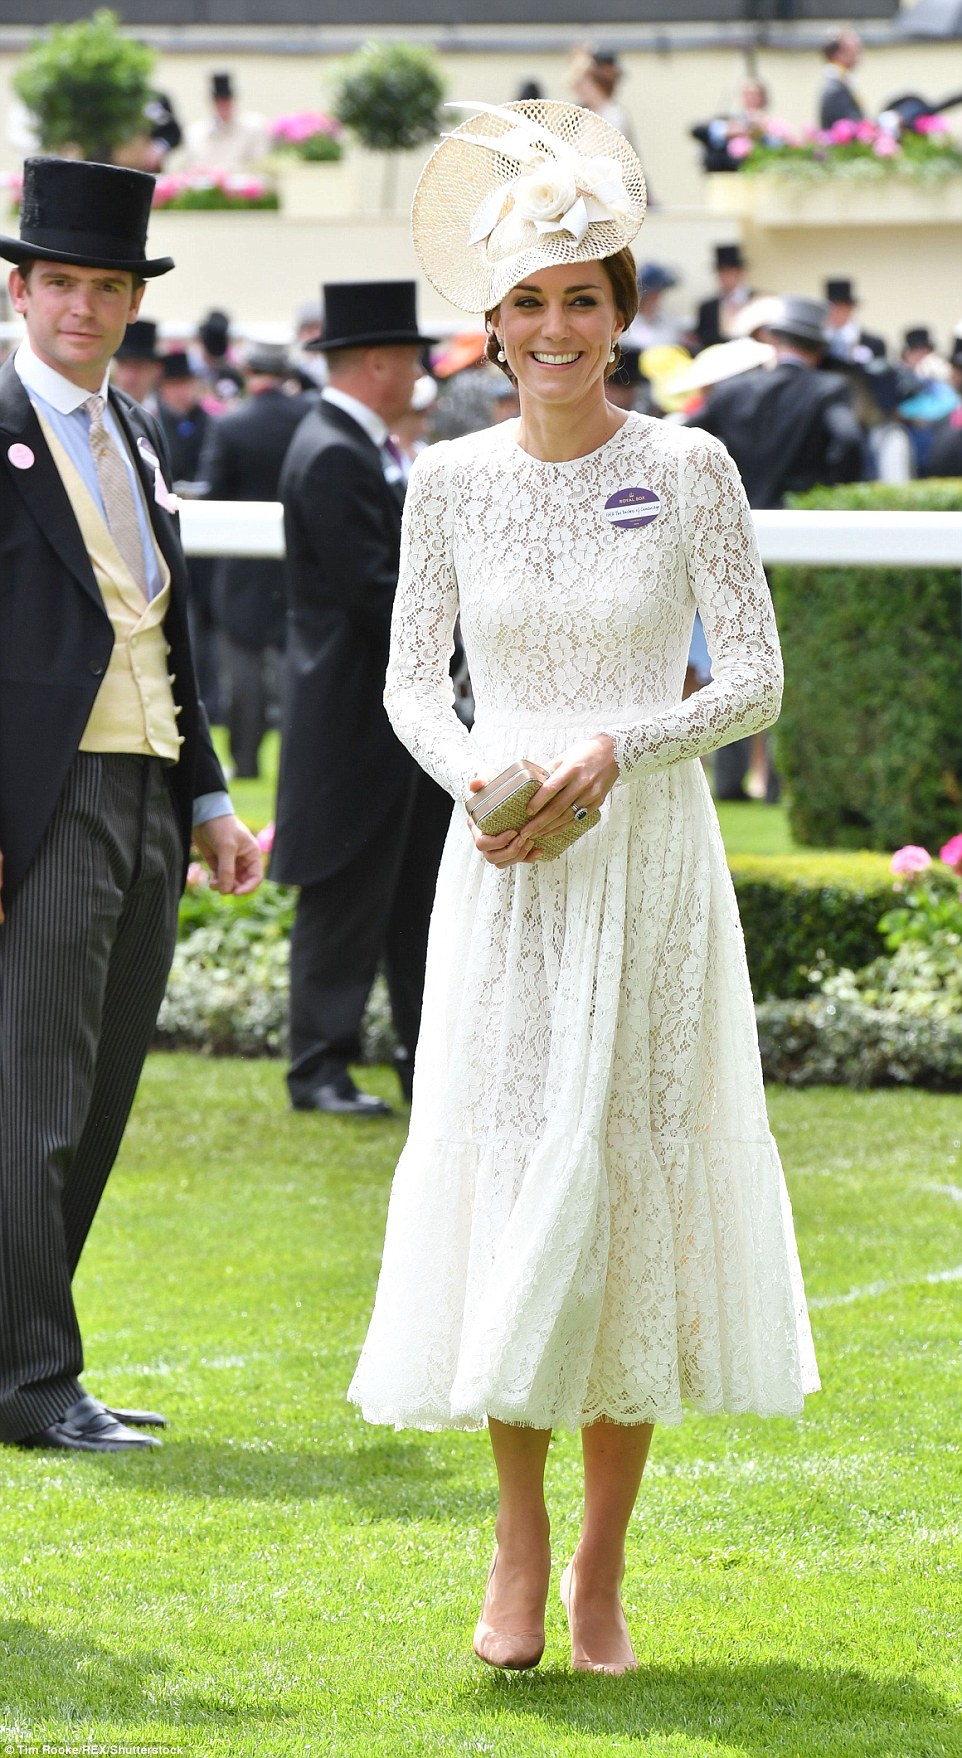 The Duchess of Cambridge chose a white lace dress by Dolce and Gabbana for her first visit to Royal Ascot